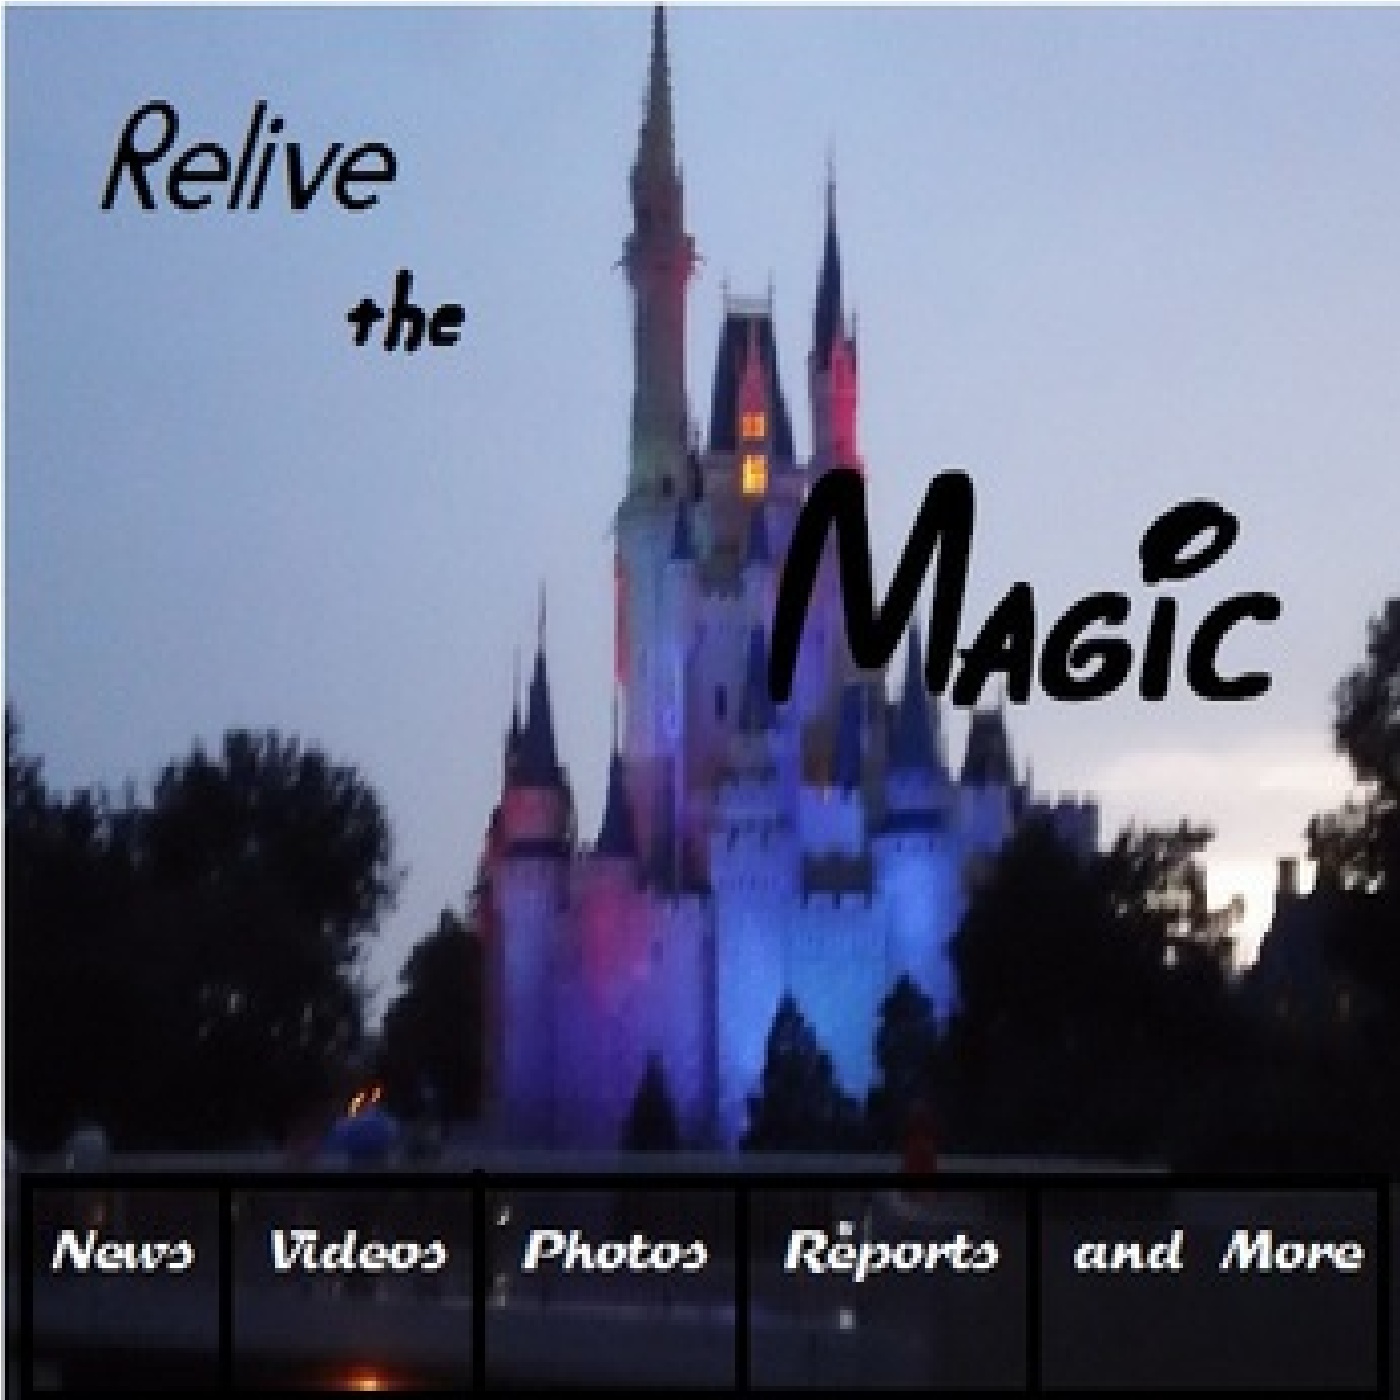 Relive the Magic Show 32 for December 9th, 2012